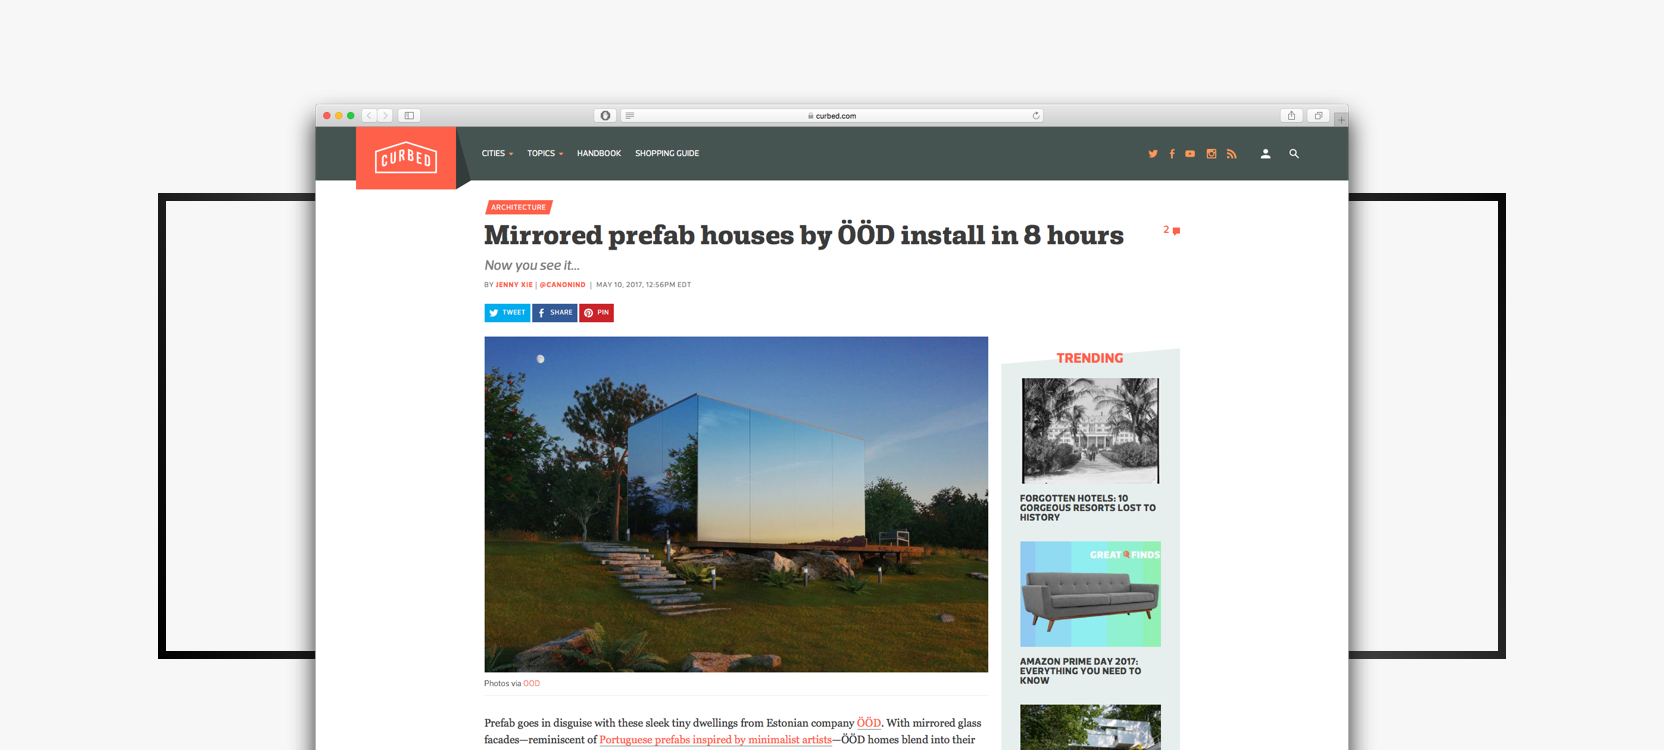 Curbed - Mirrored prefab houses by ÖÖD install in 8 hours